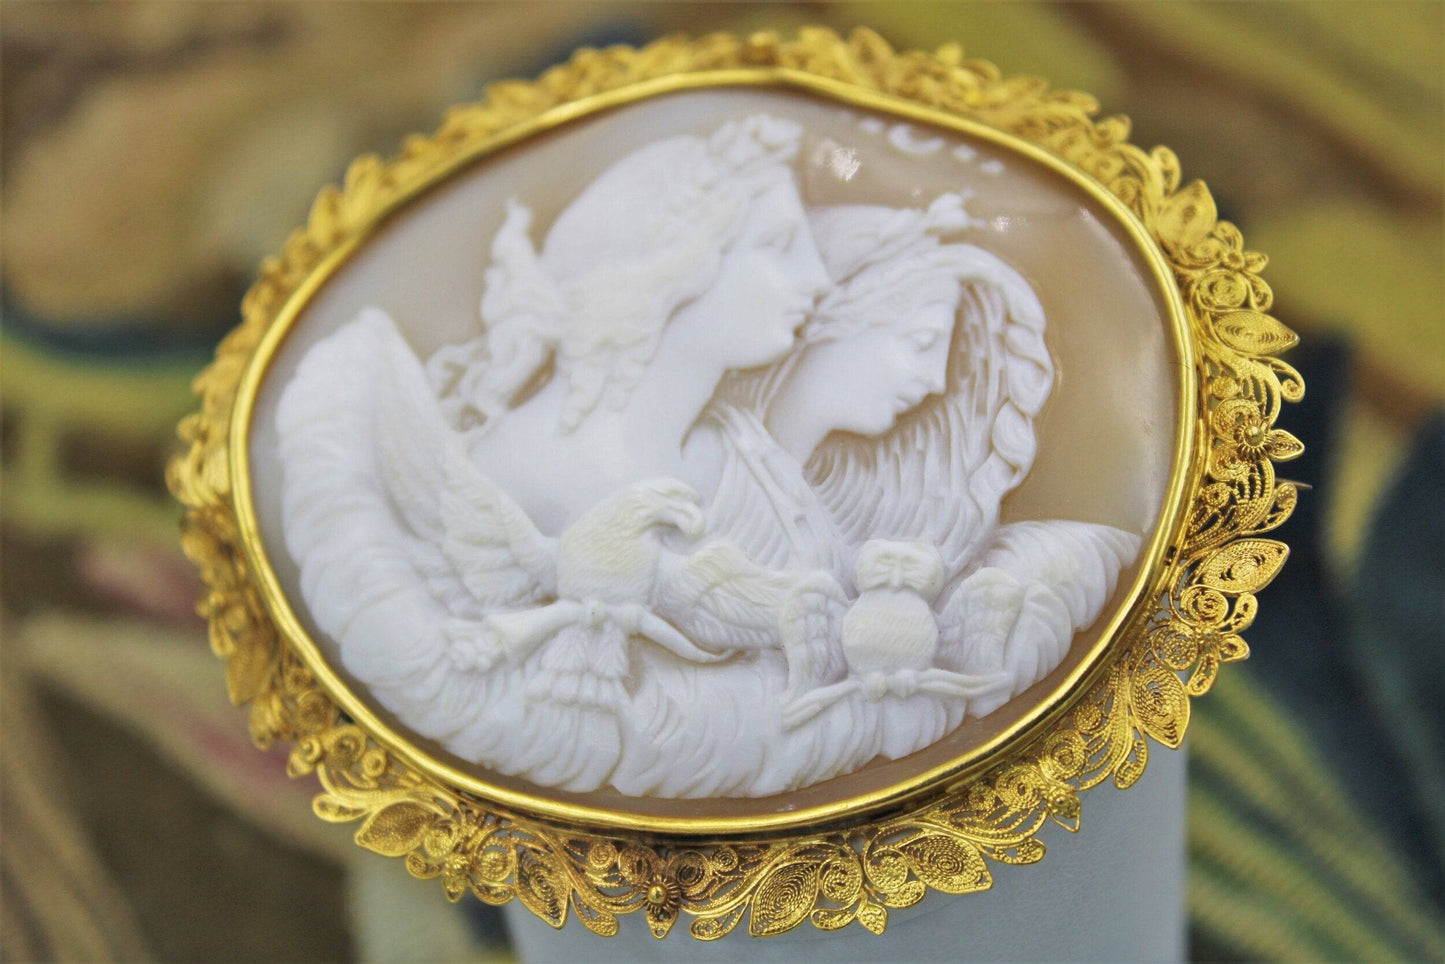 A very fine Shell Cameo and 18ct Yellow Gold (Marked) "Cannetille" Work Brooch, Circa 1830. - Robin Haydock Antiques